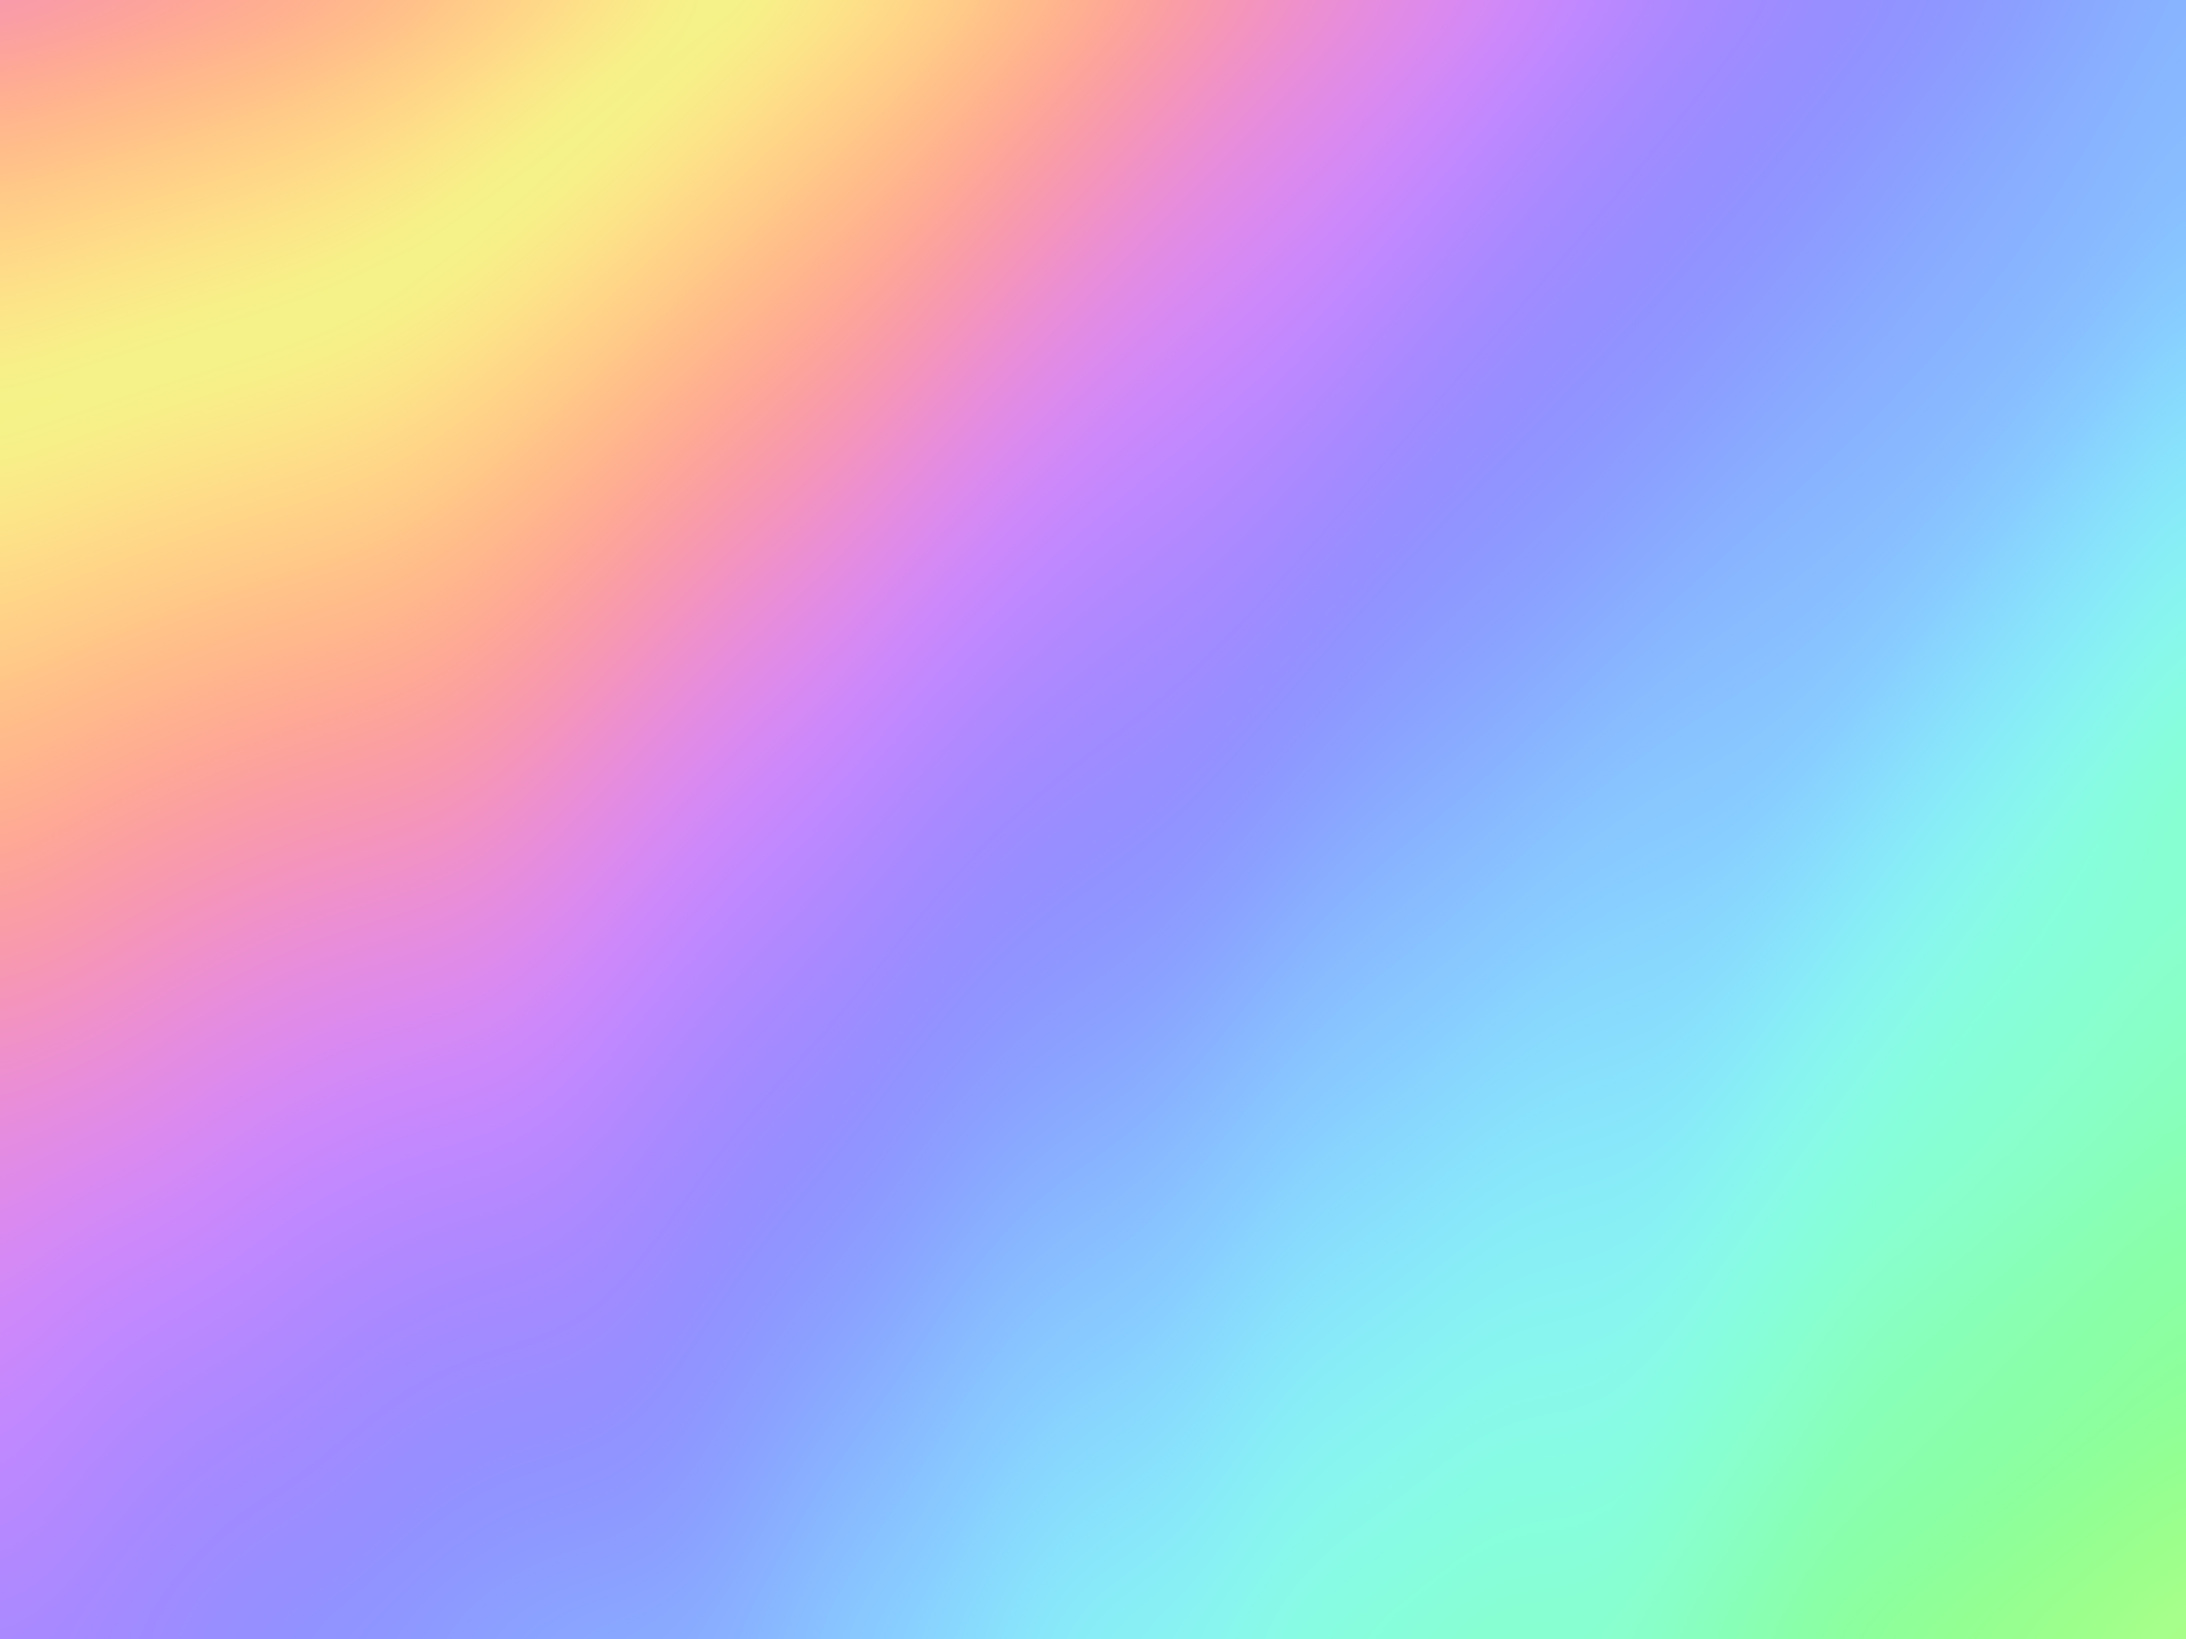 Colorful Gradient
Rainbow background   